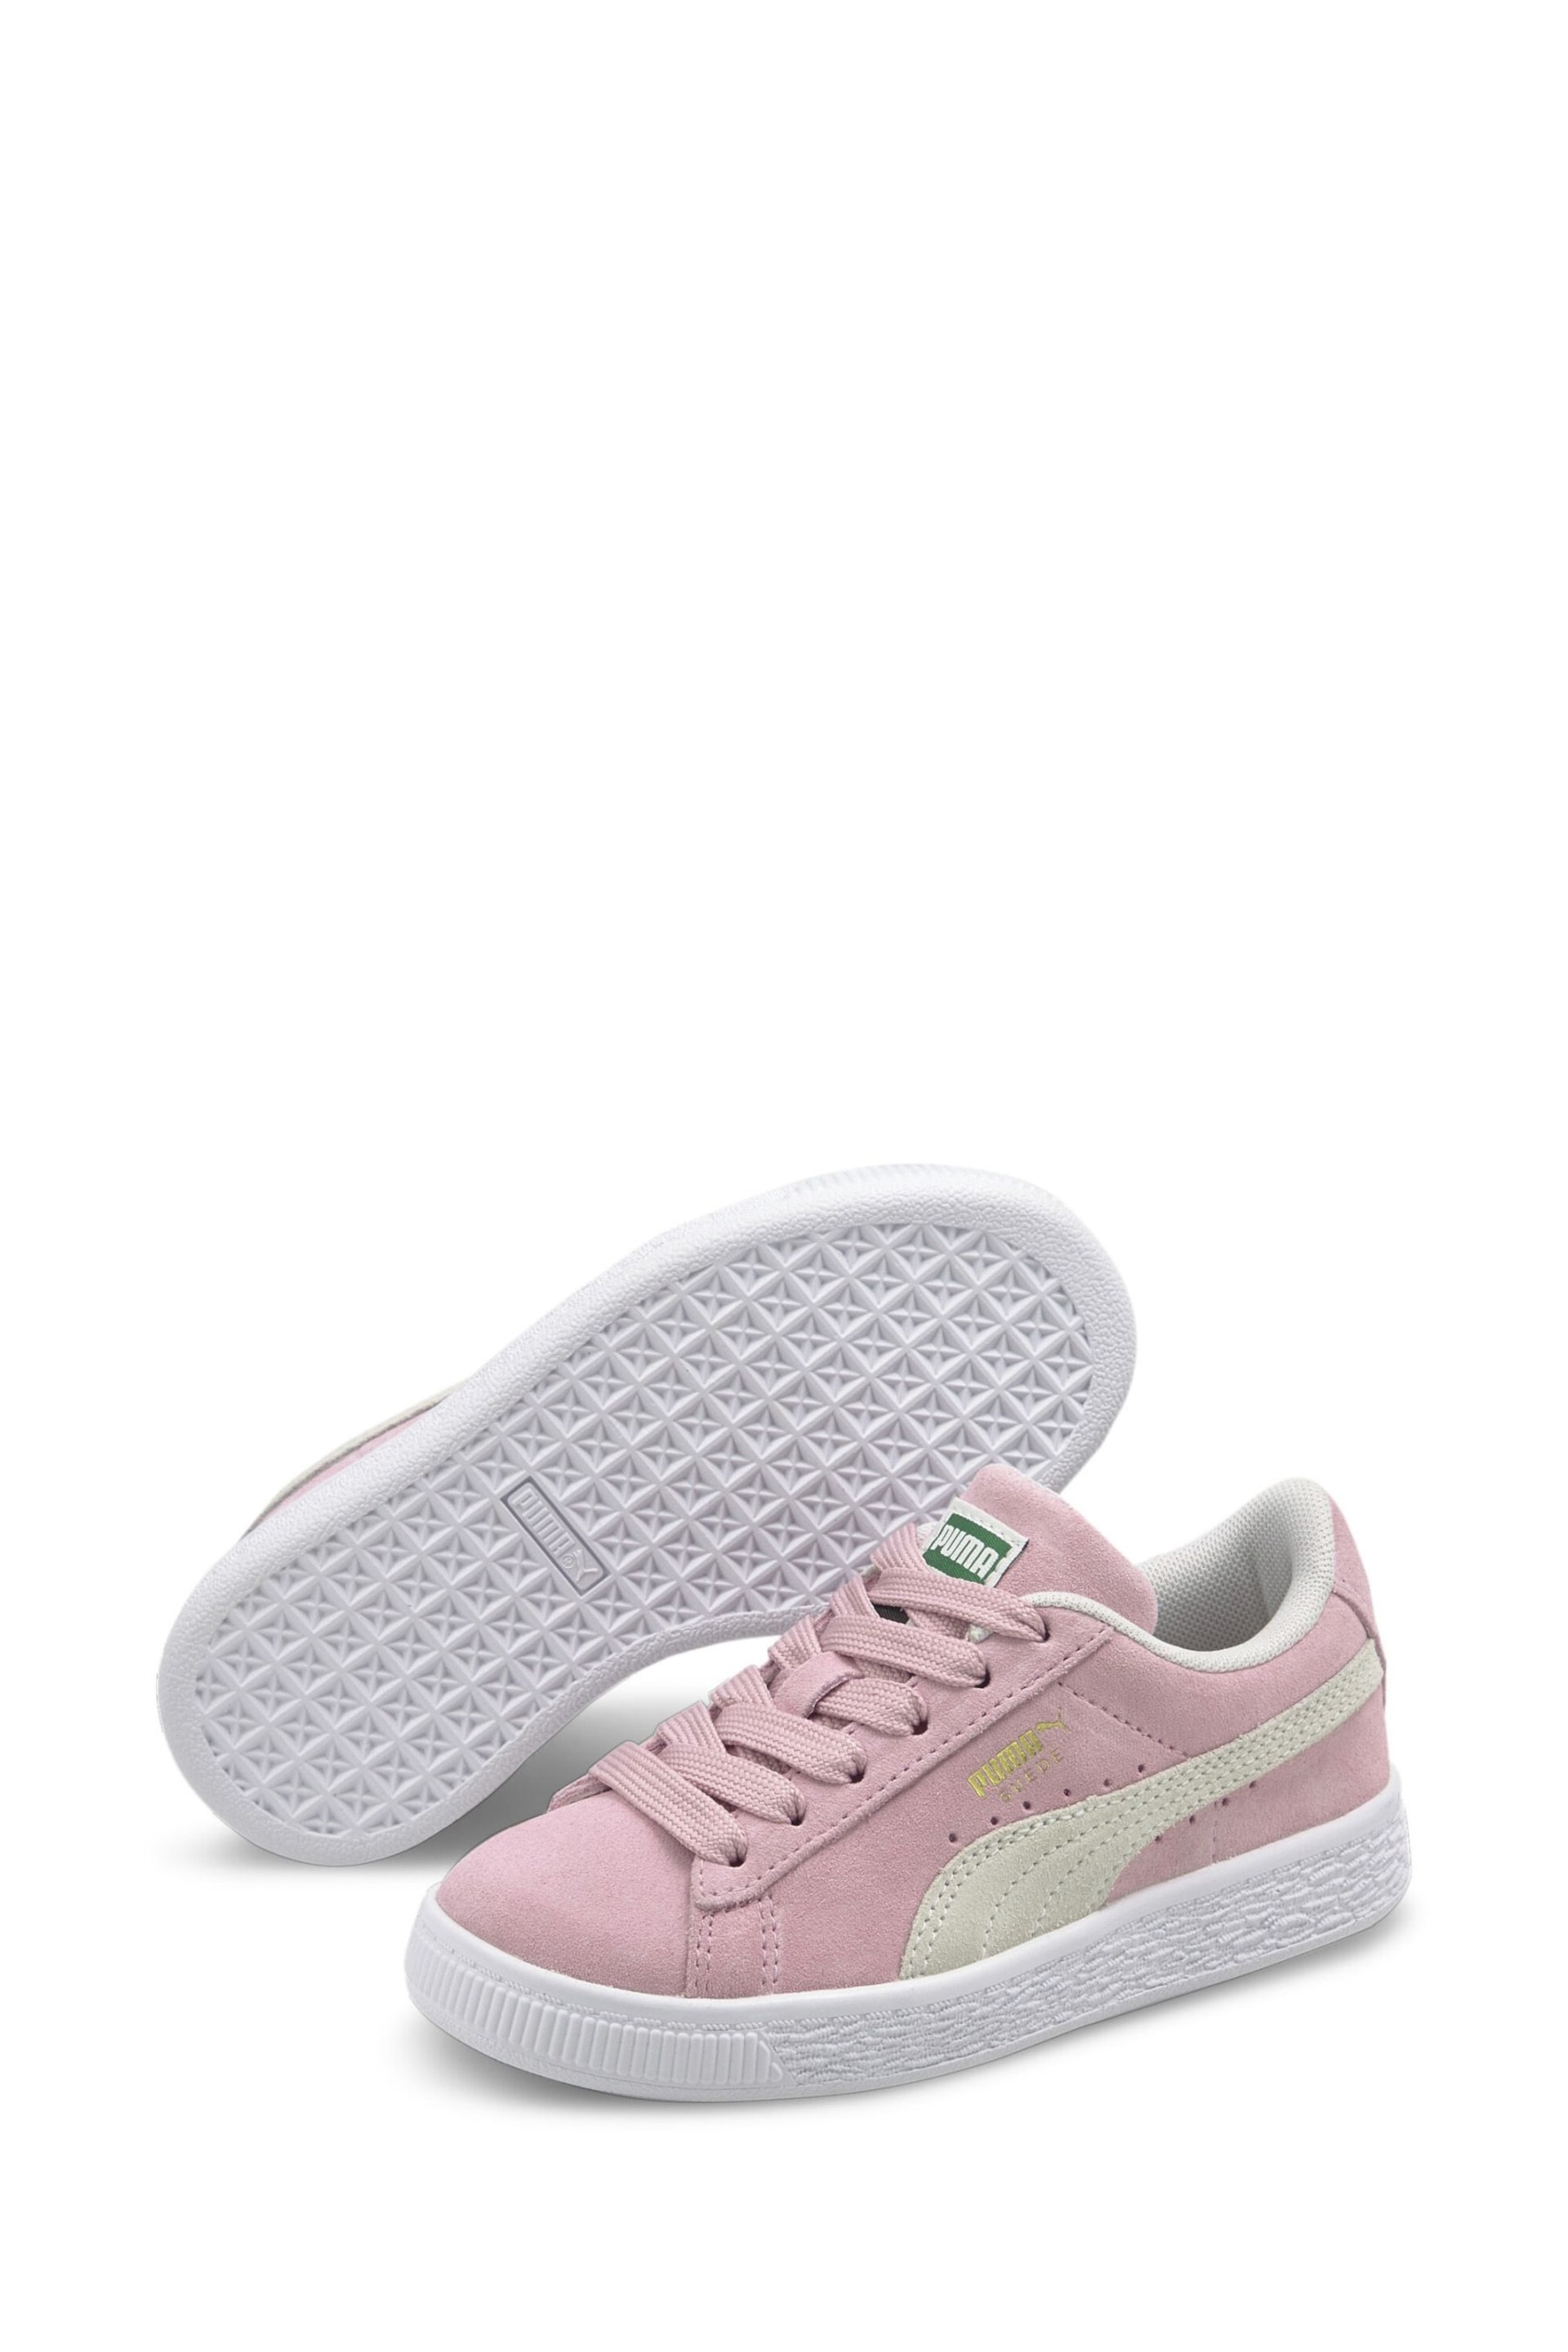 Puma Pink Suede Classic XXI Kids Trainers - Image 2 of 6